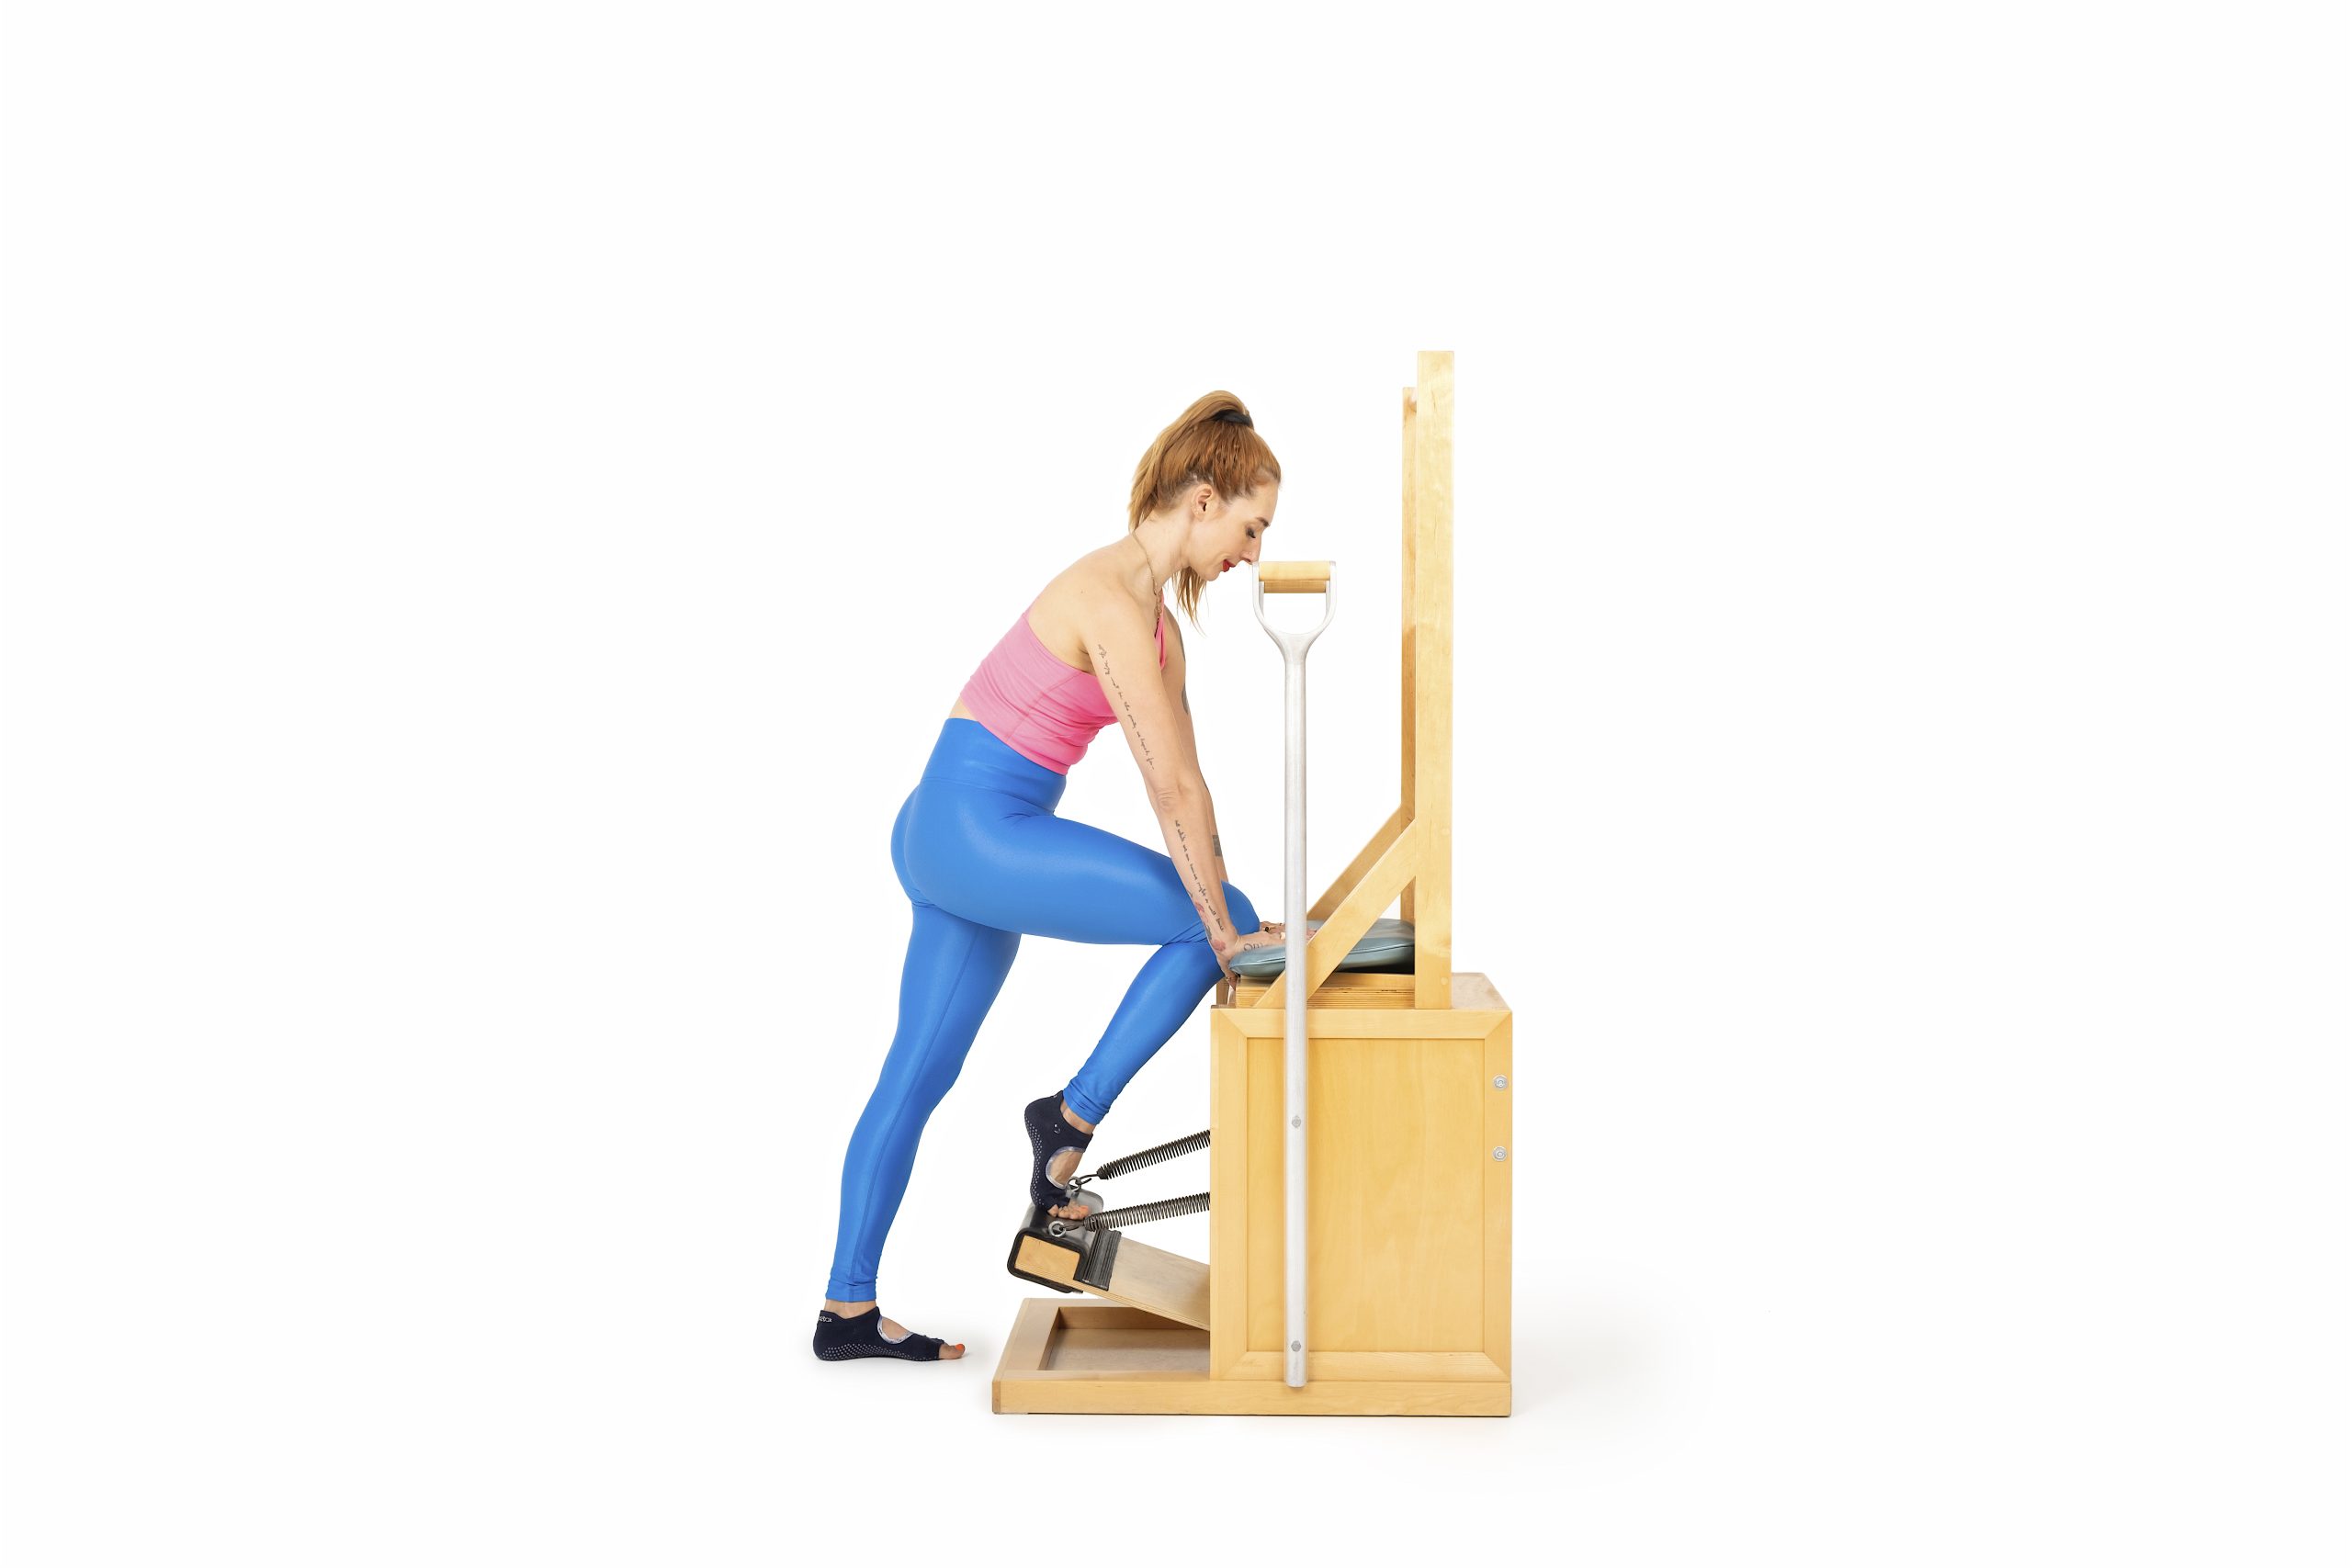 achilles stretch on the high chair online pilates classes